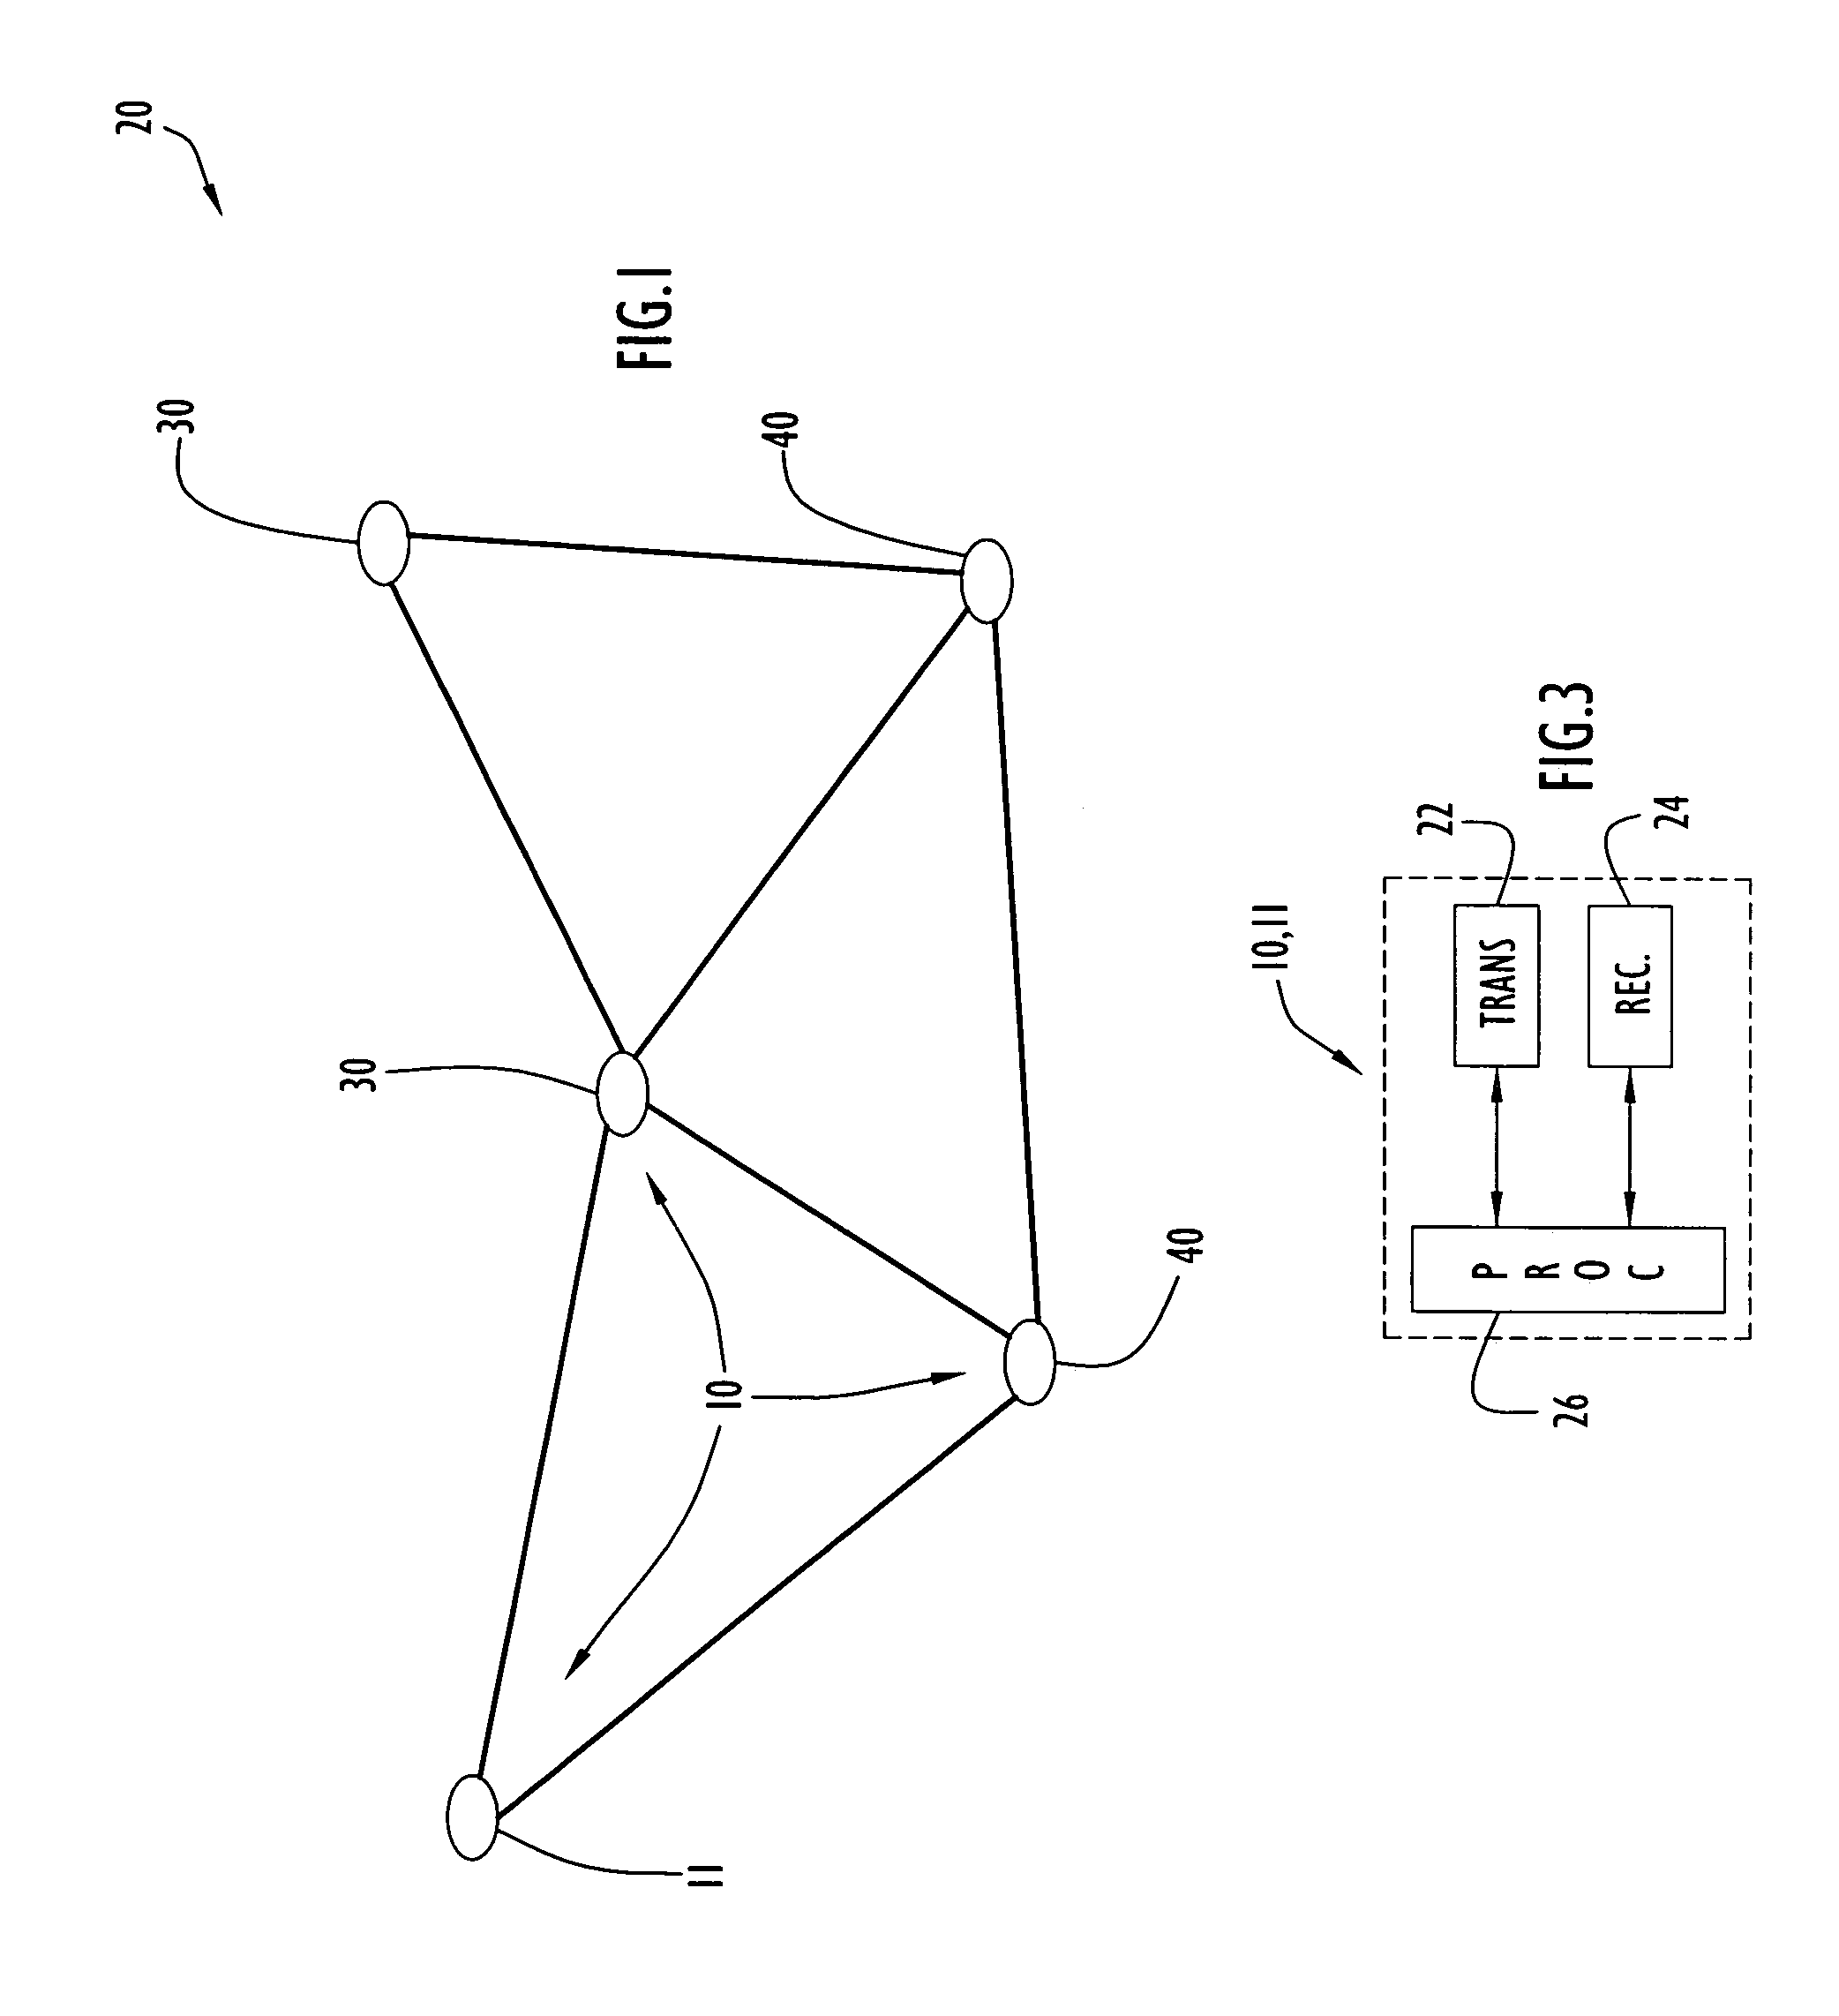 Method and apparatus for dynamic channel access within wireless networks